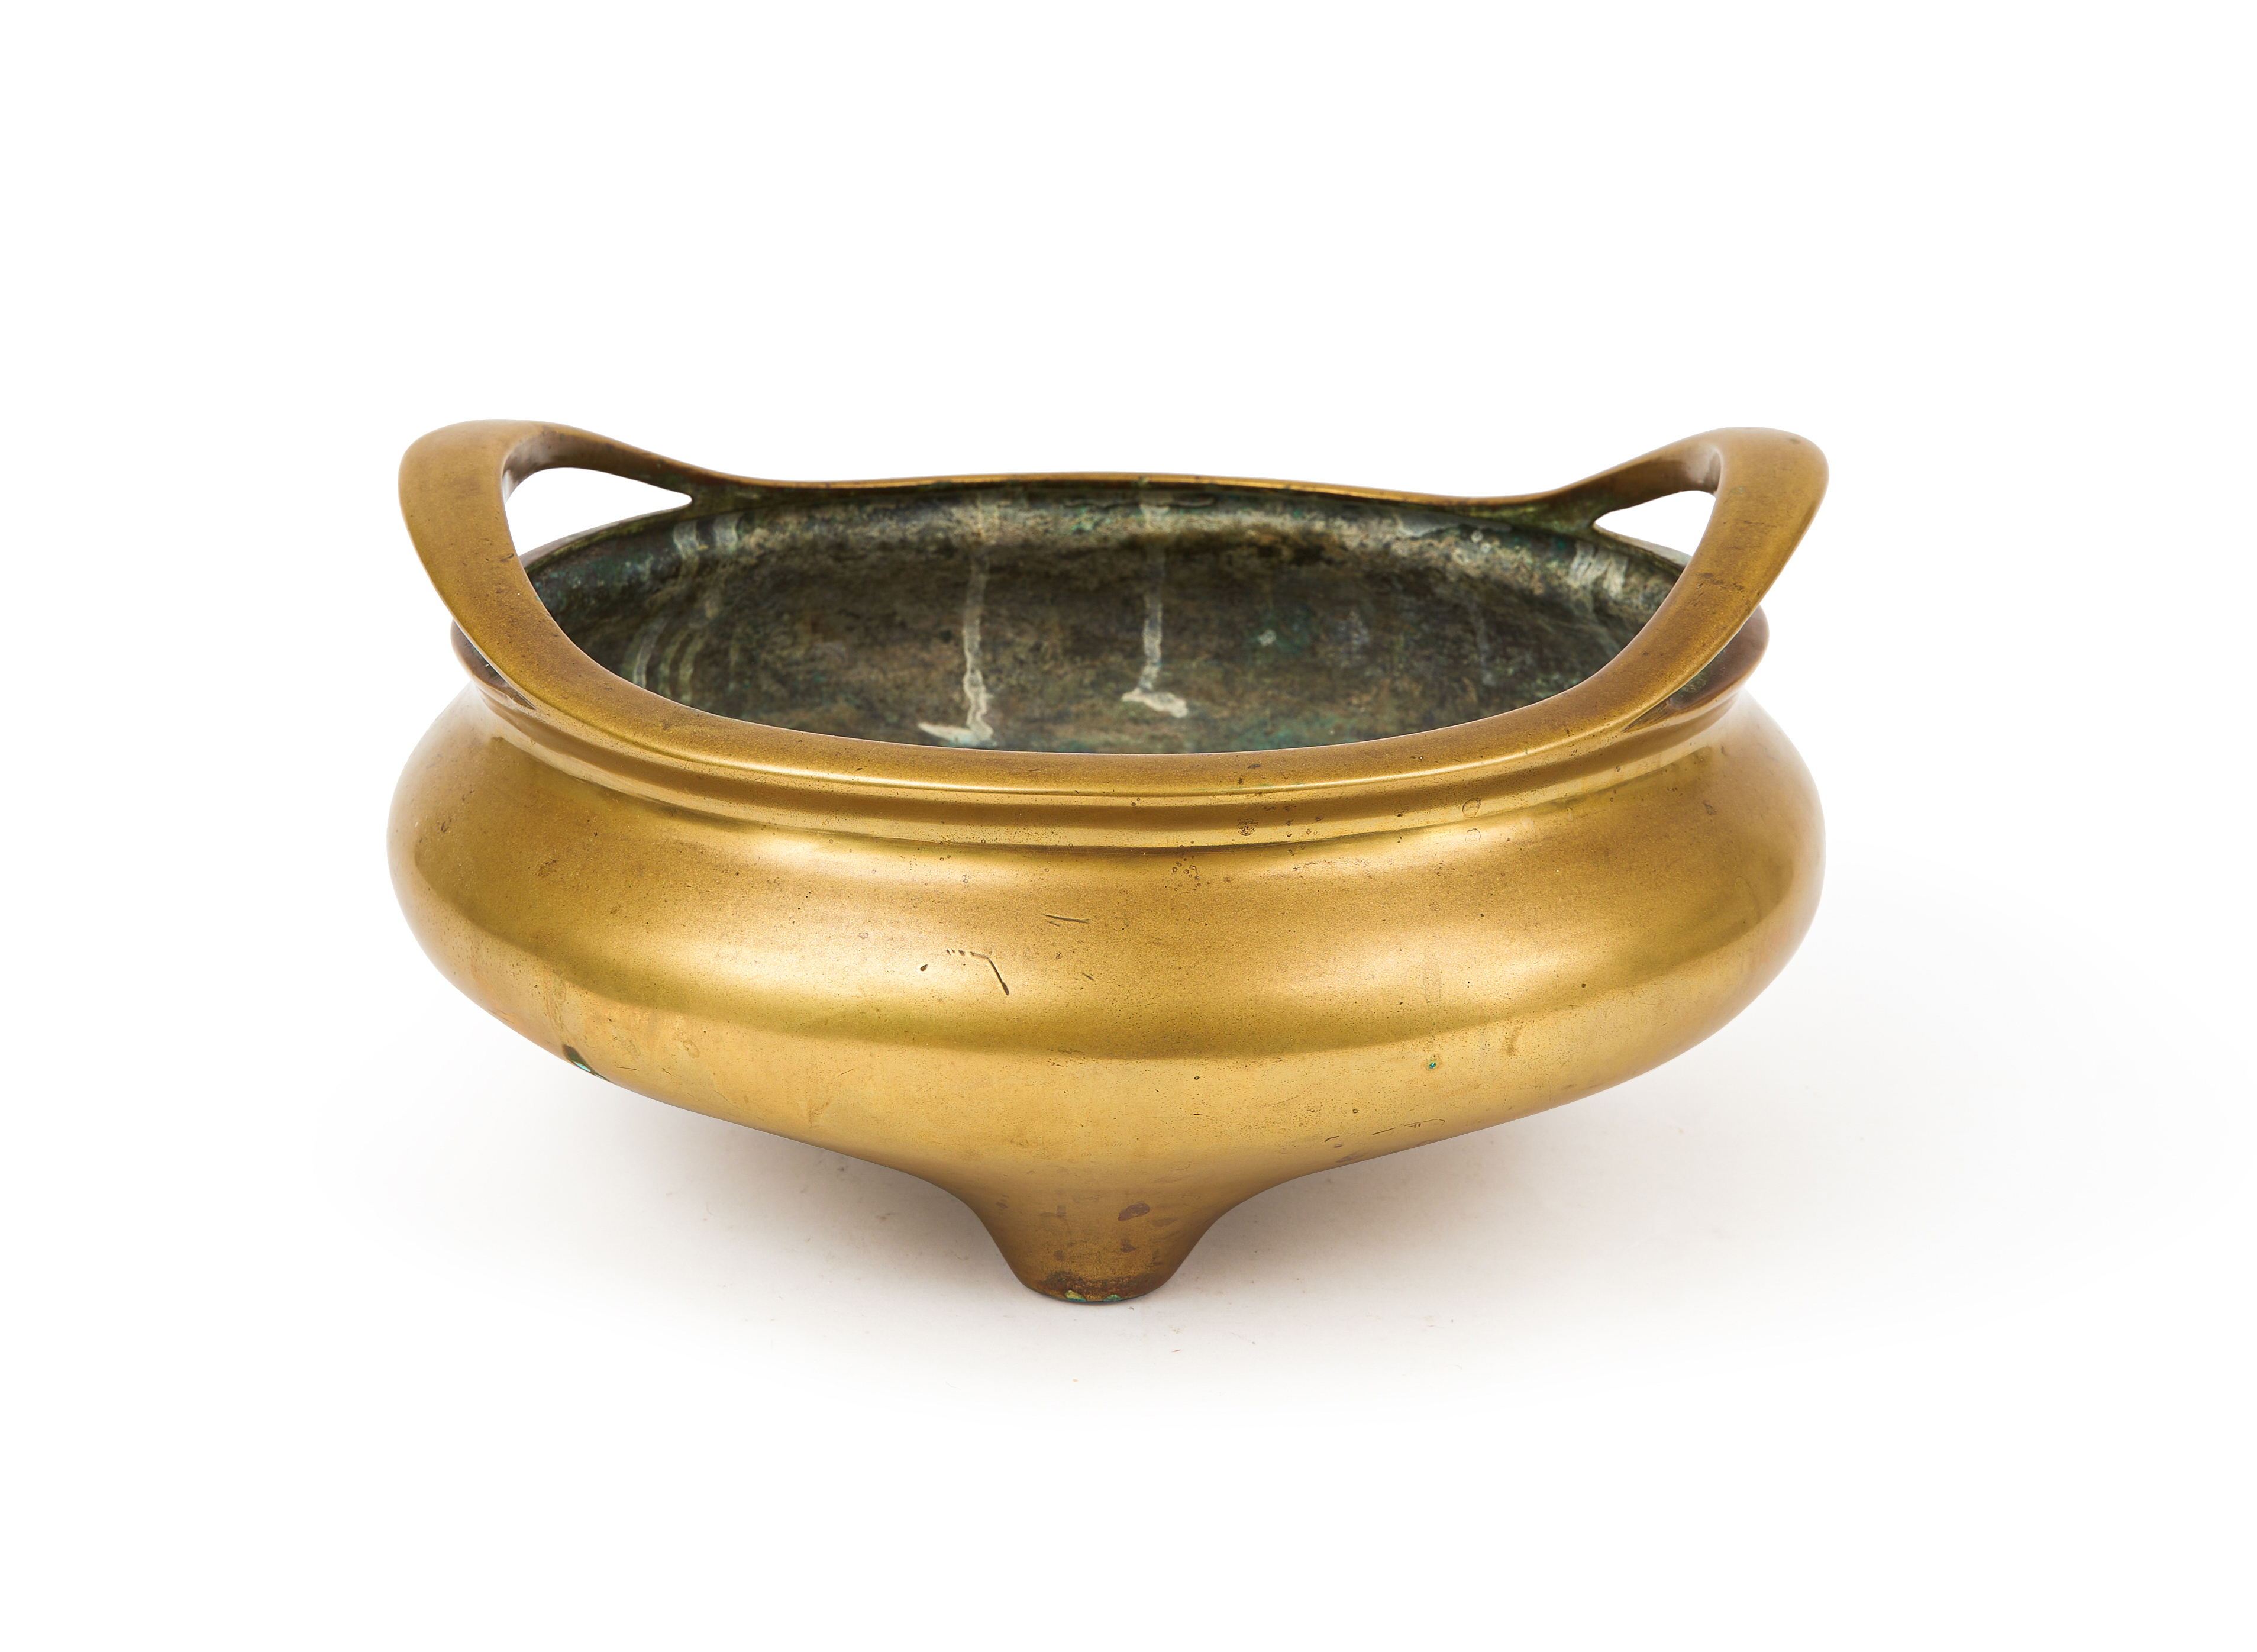 A LARGE CHINESE TRIPOD GILT BRONZE CENSER, QING DYNASTY (1644-1911)